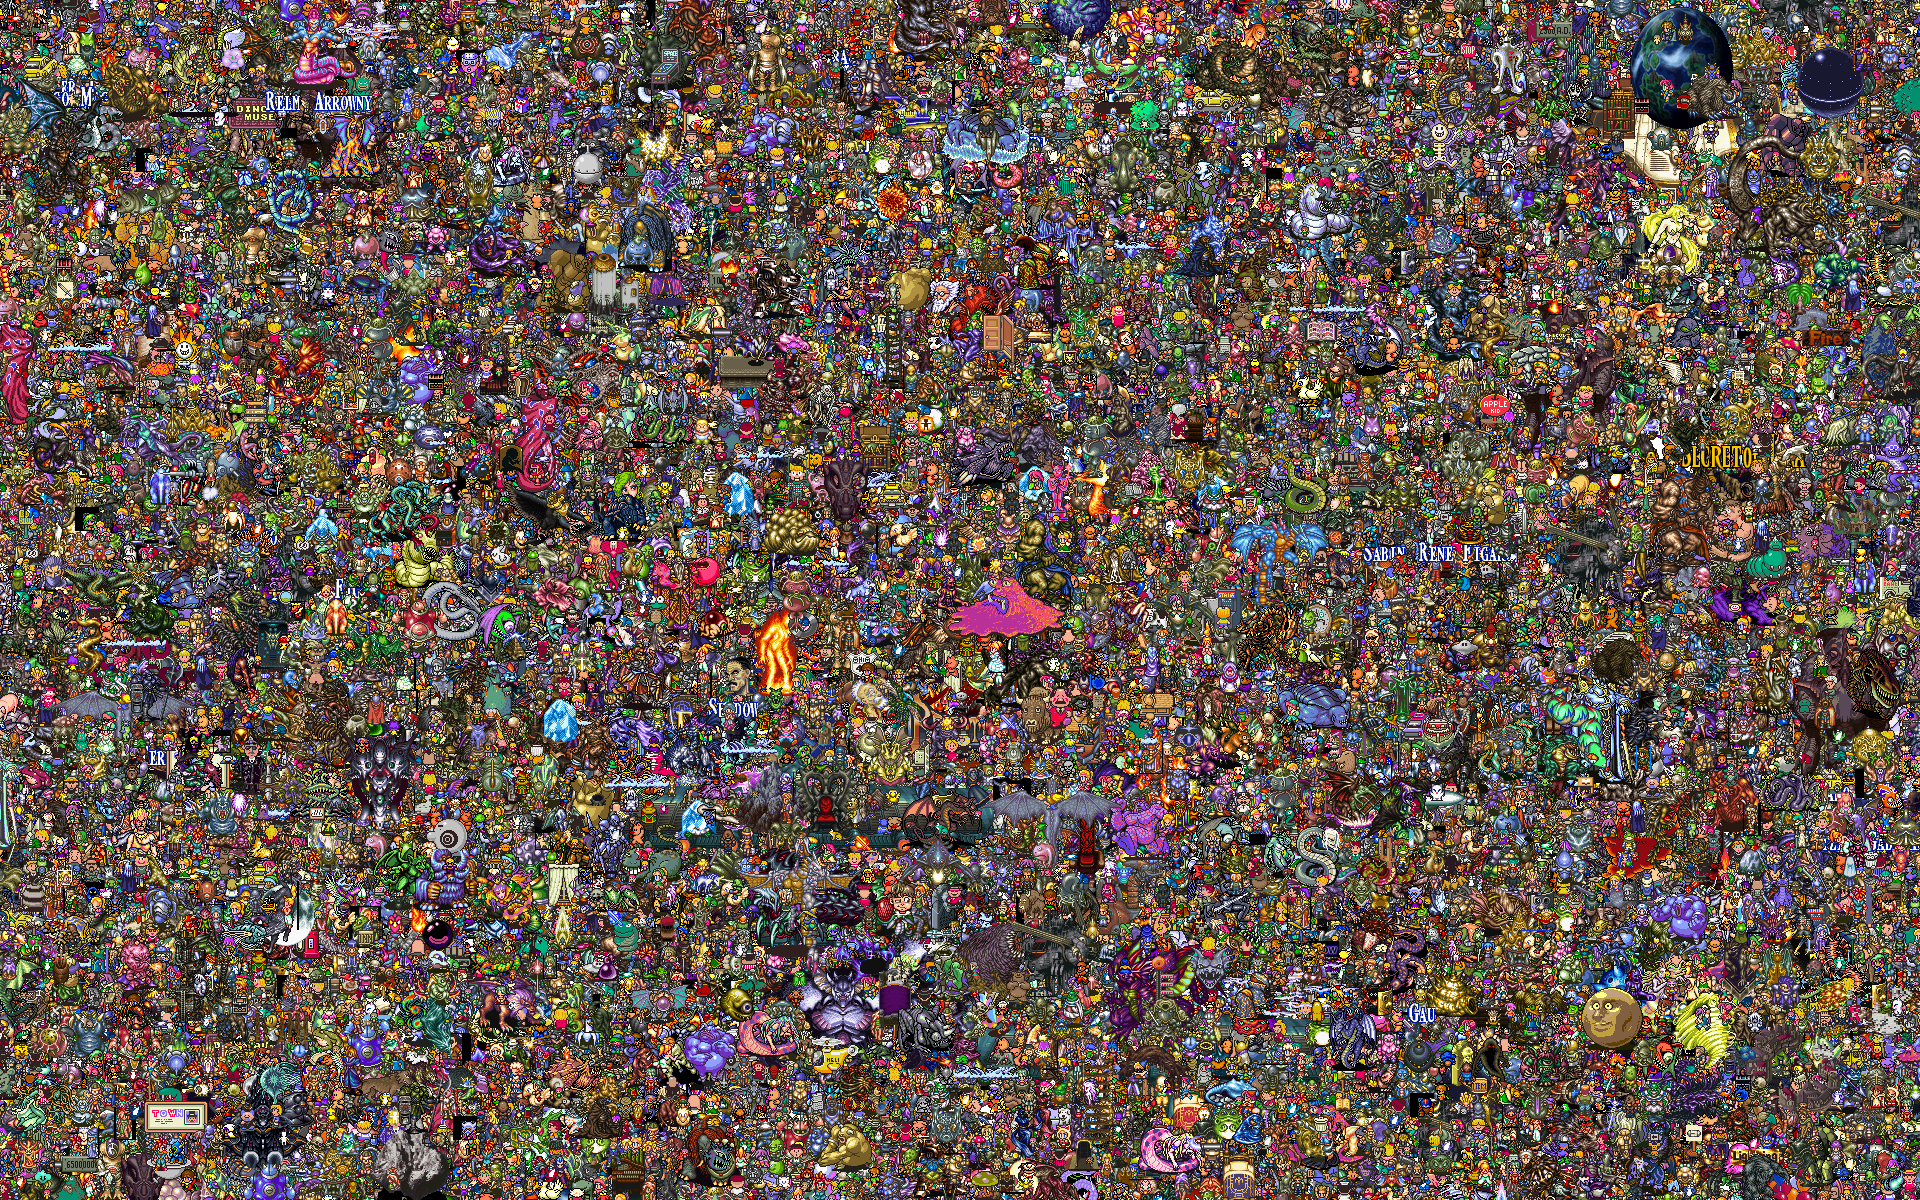 This Wallpaper Has 000 SNES Sprites In It - Let's Play Where's Wally!